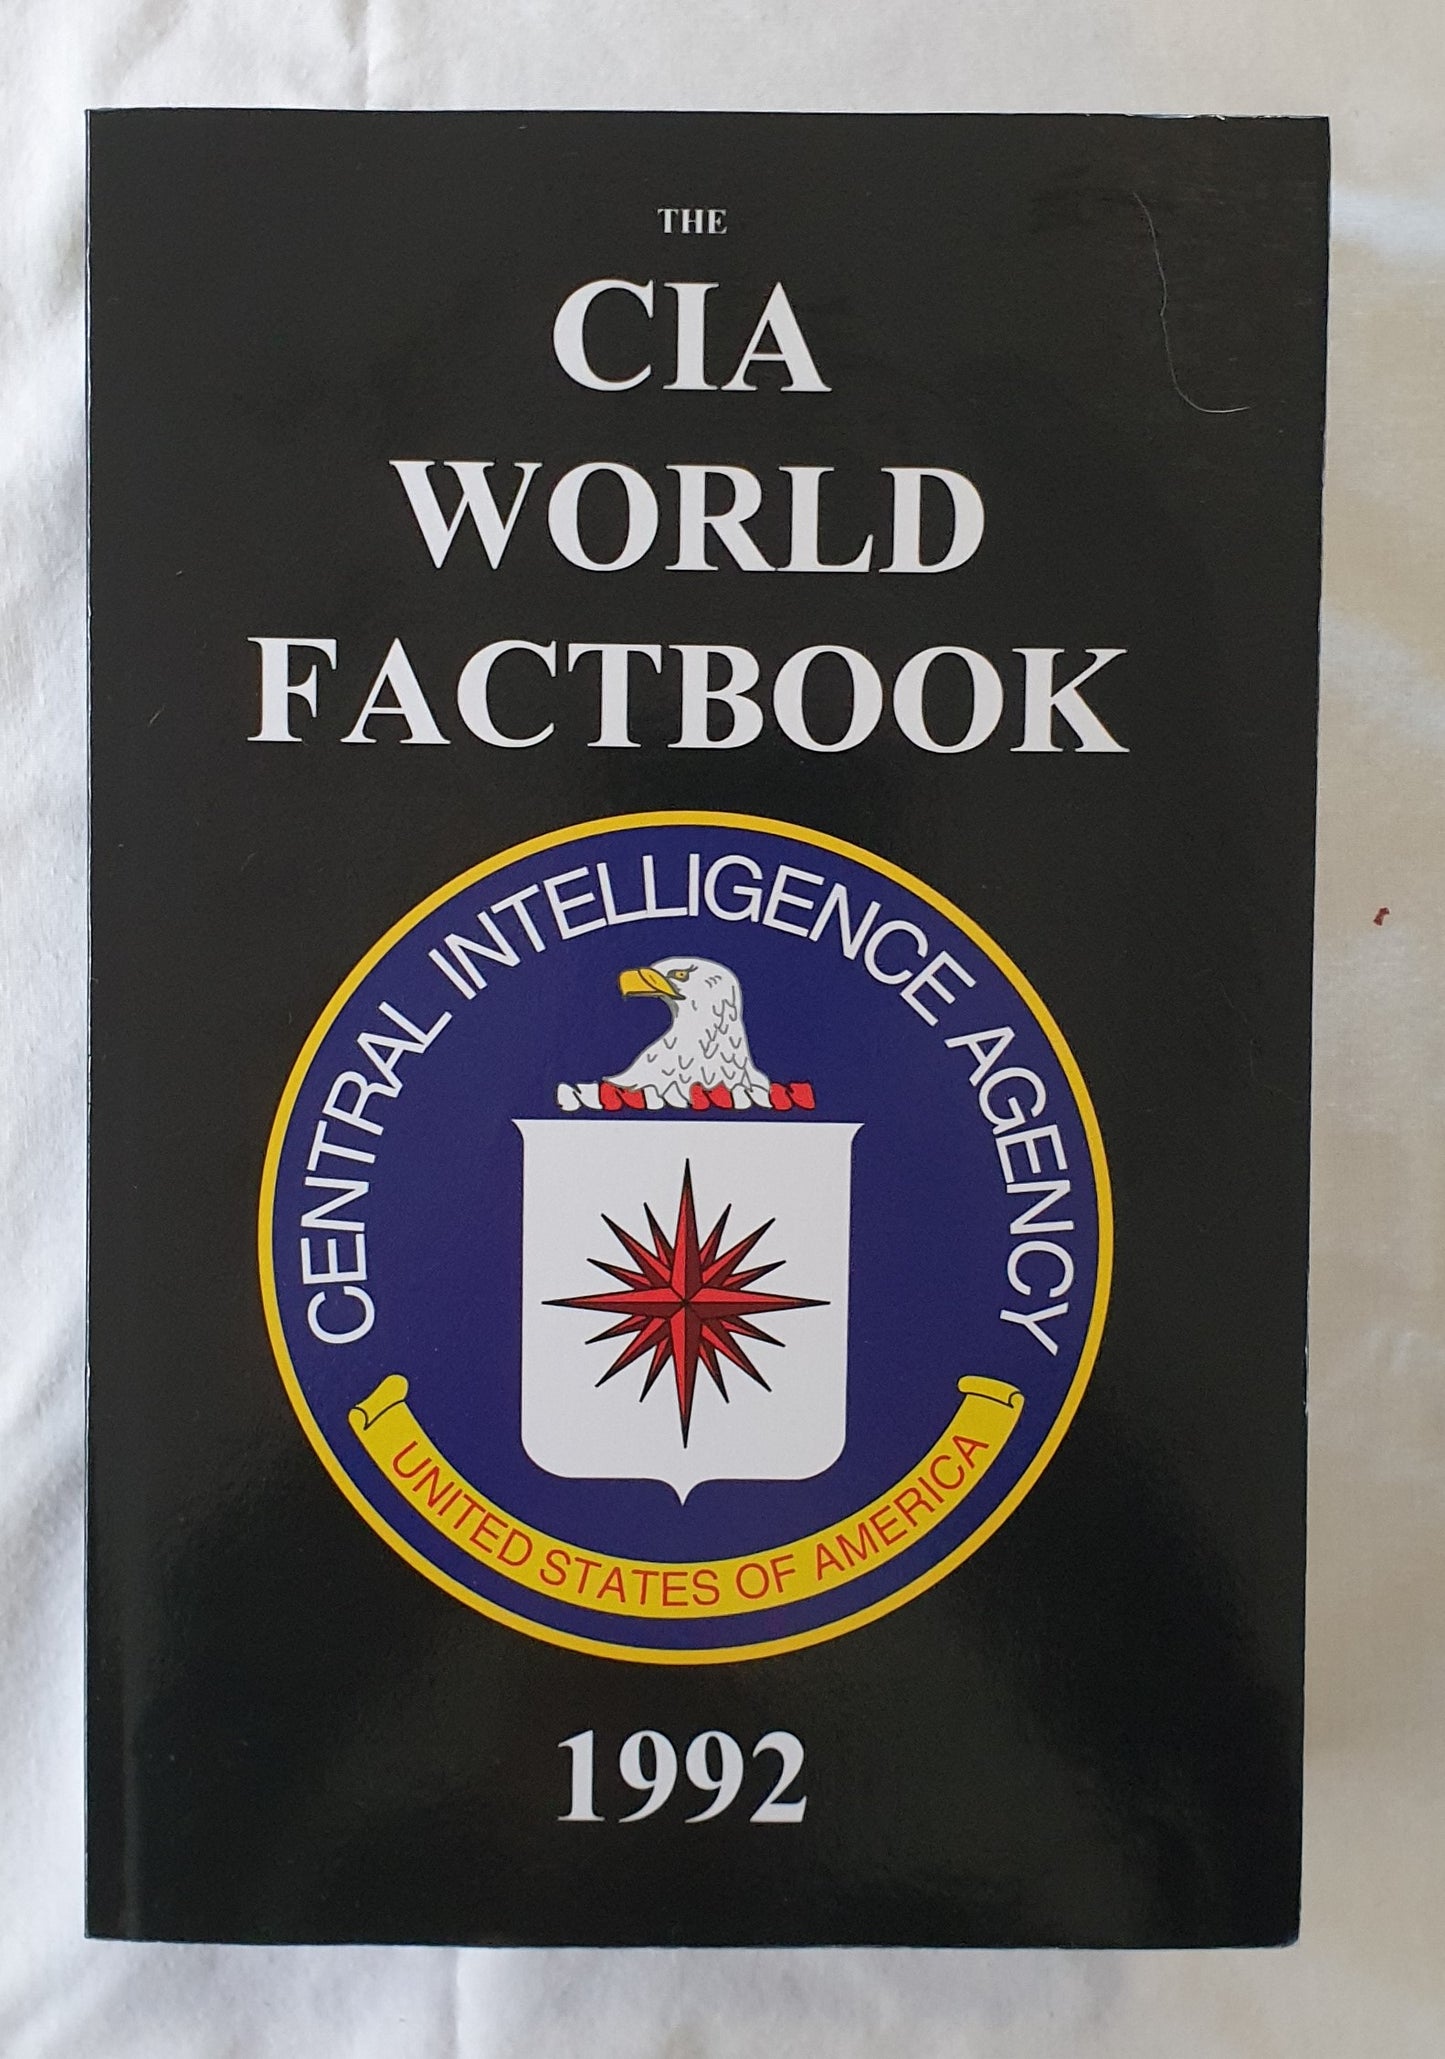 The CIA World Factbook 1992 by United States Central Intelligence Agency